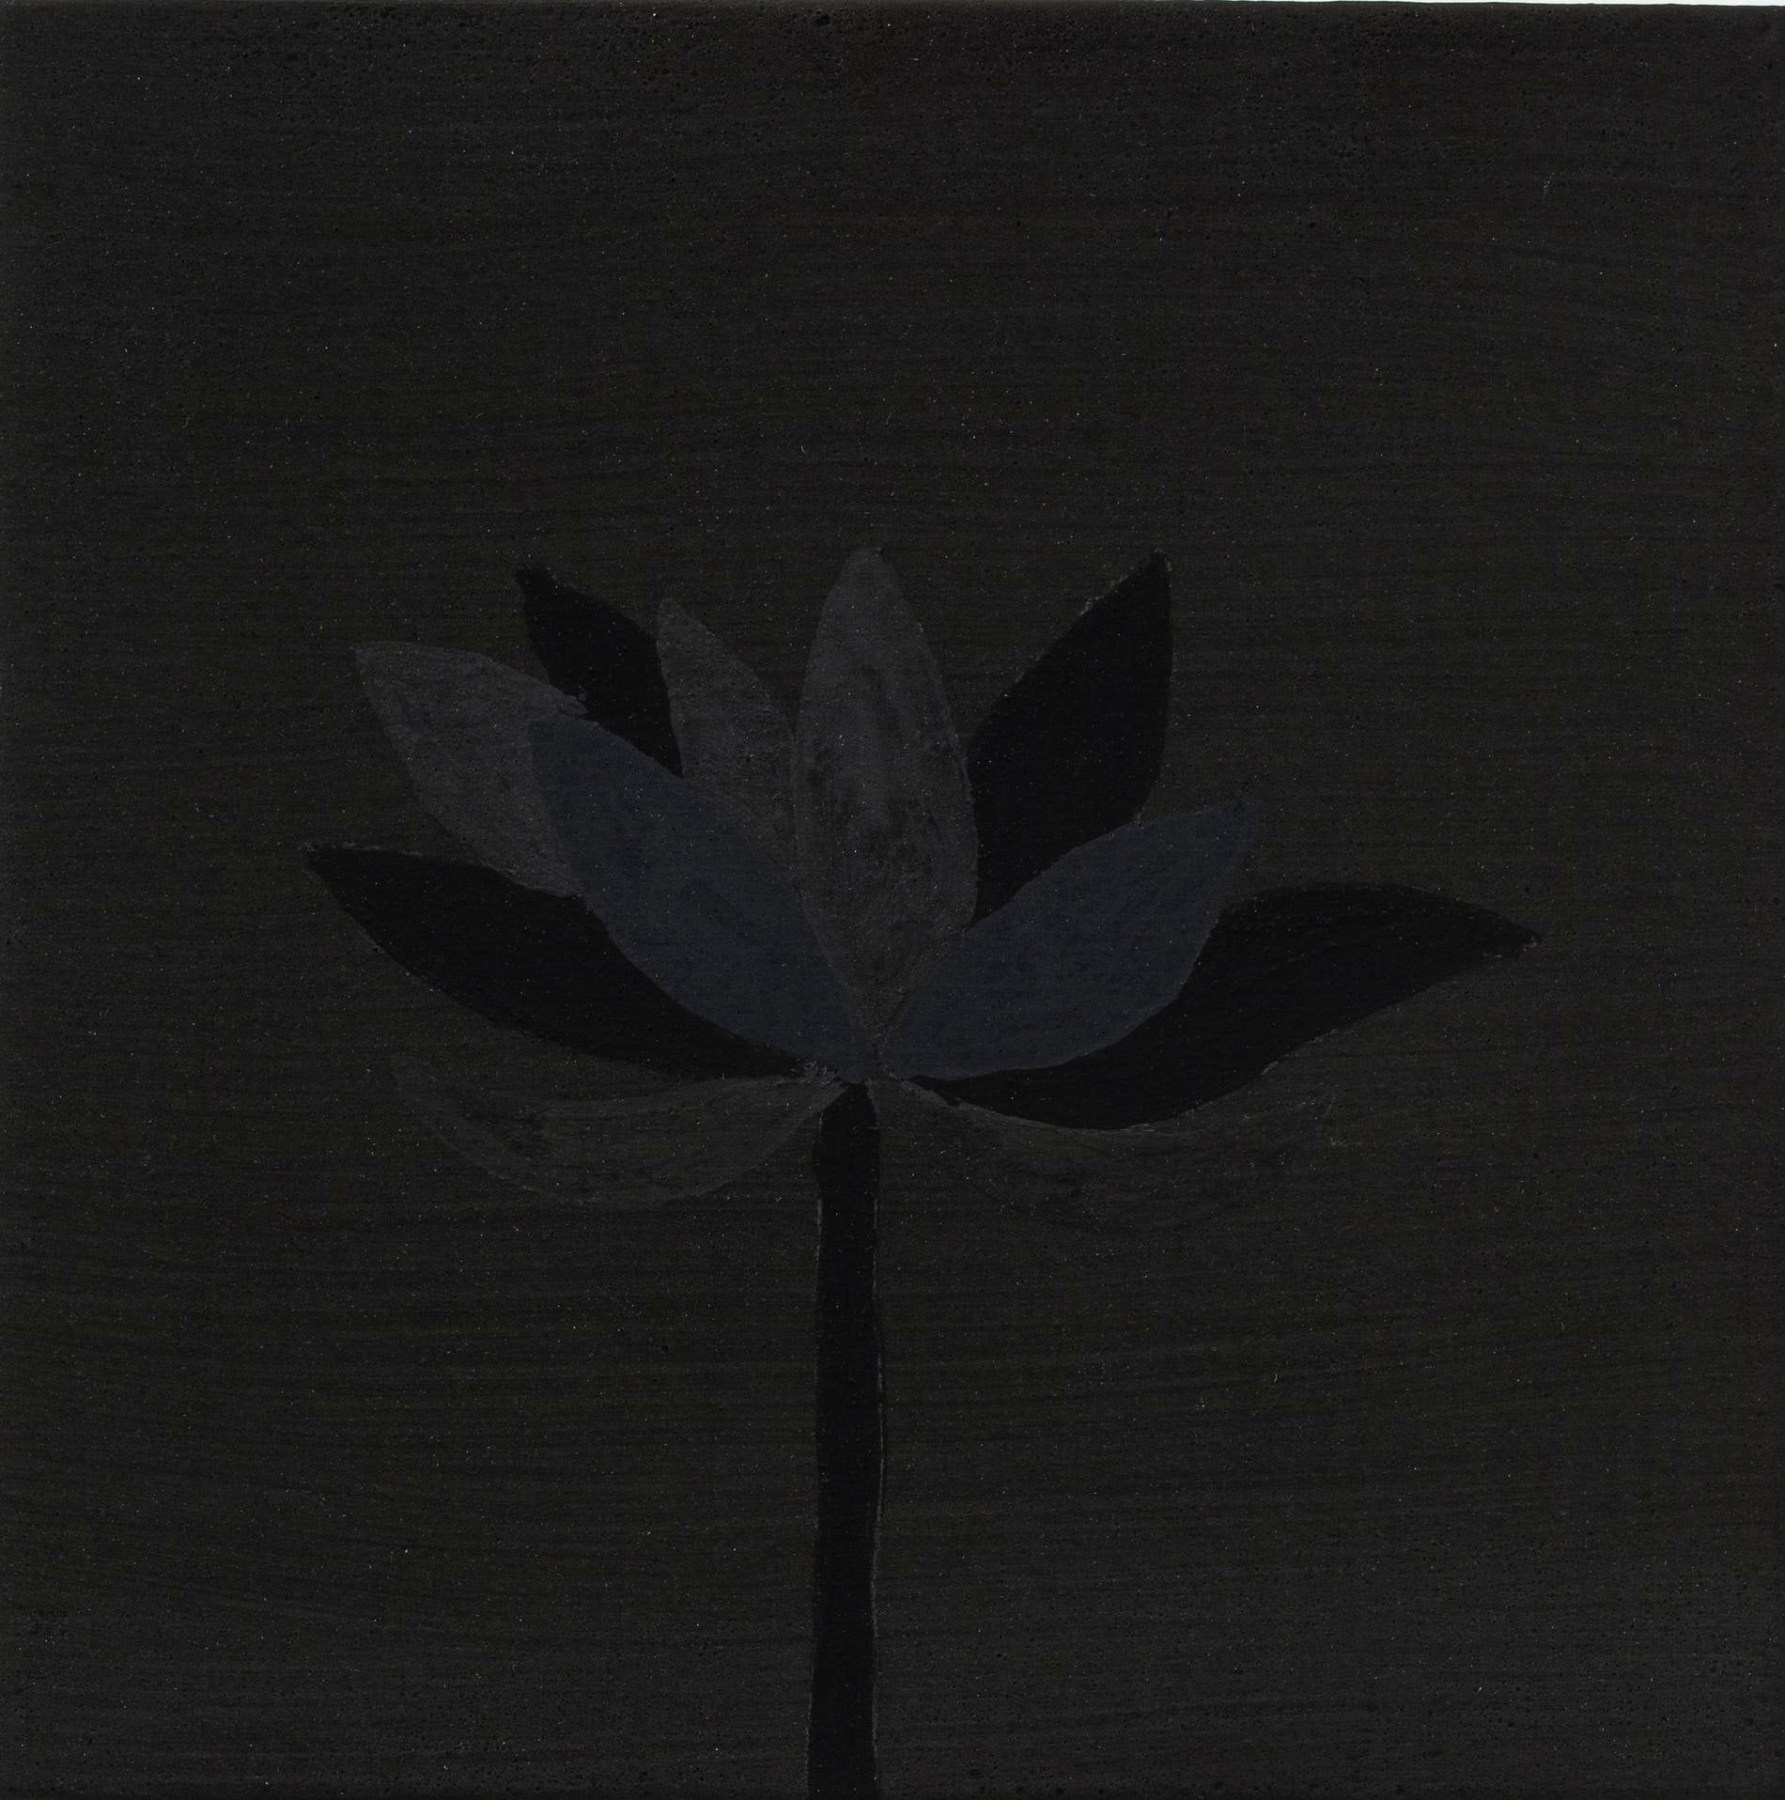 Abstract painting of a lily in dark hues blended into the dark background